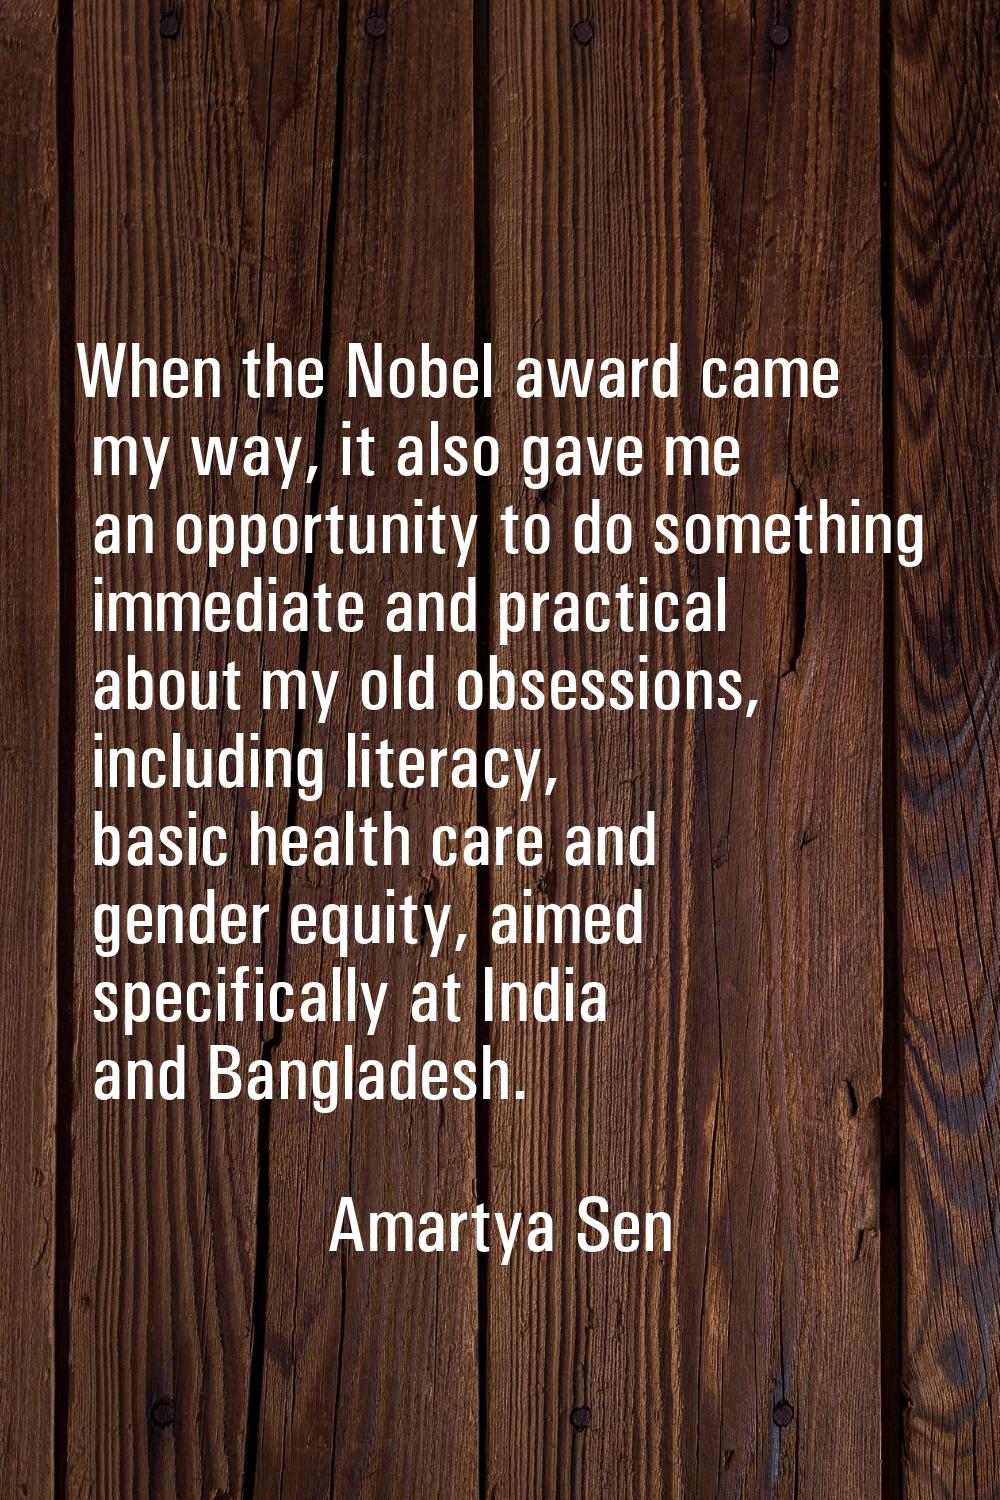 When the Nobel award came my way, it also gave me an opportunity to do something immediate and prac